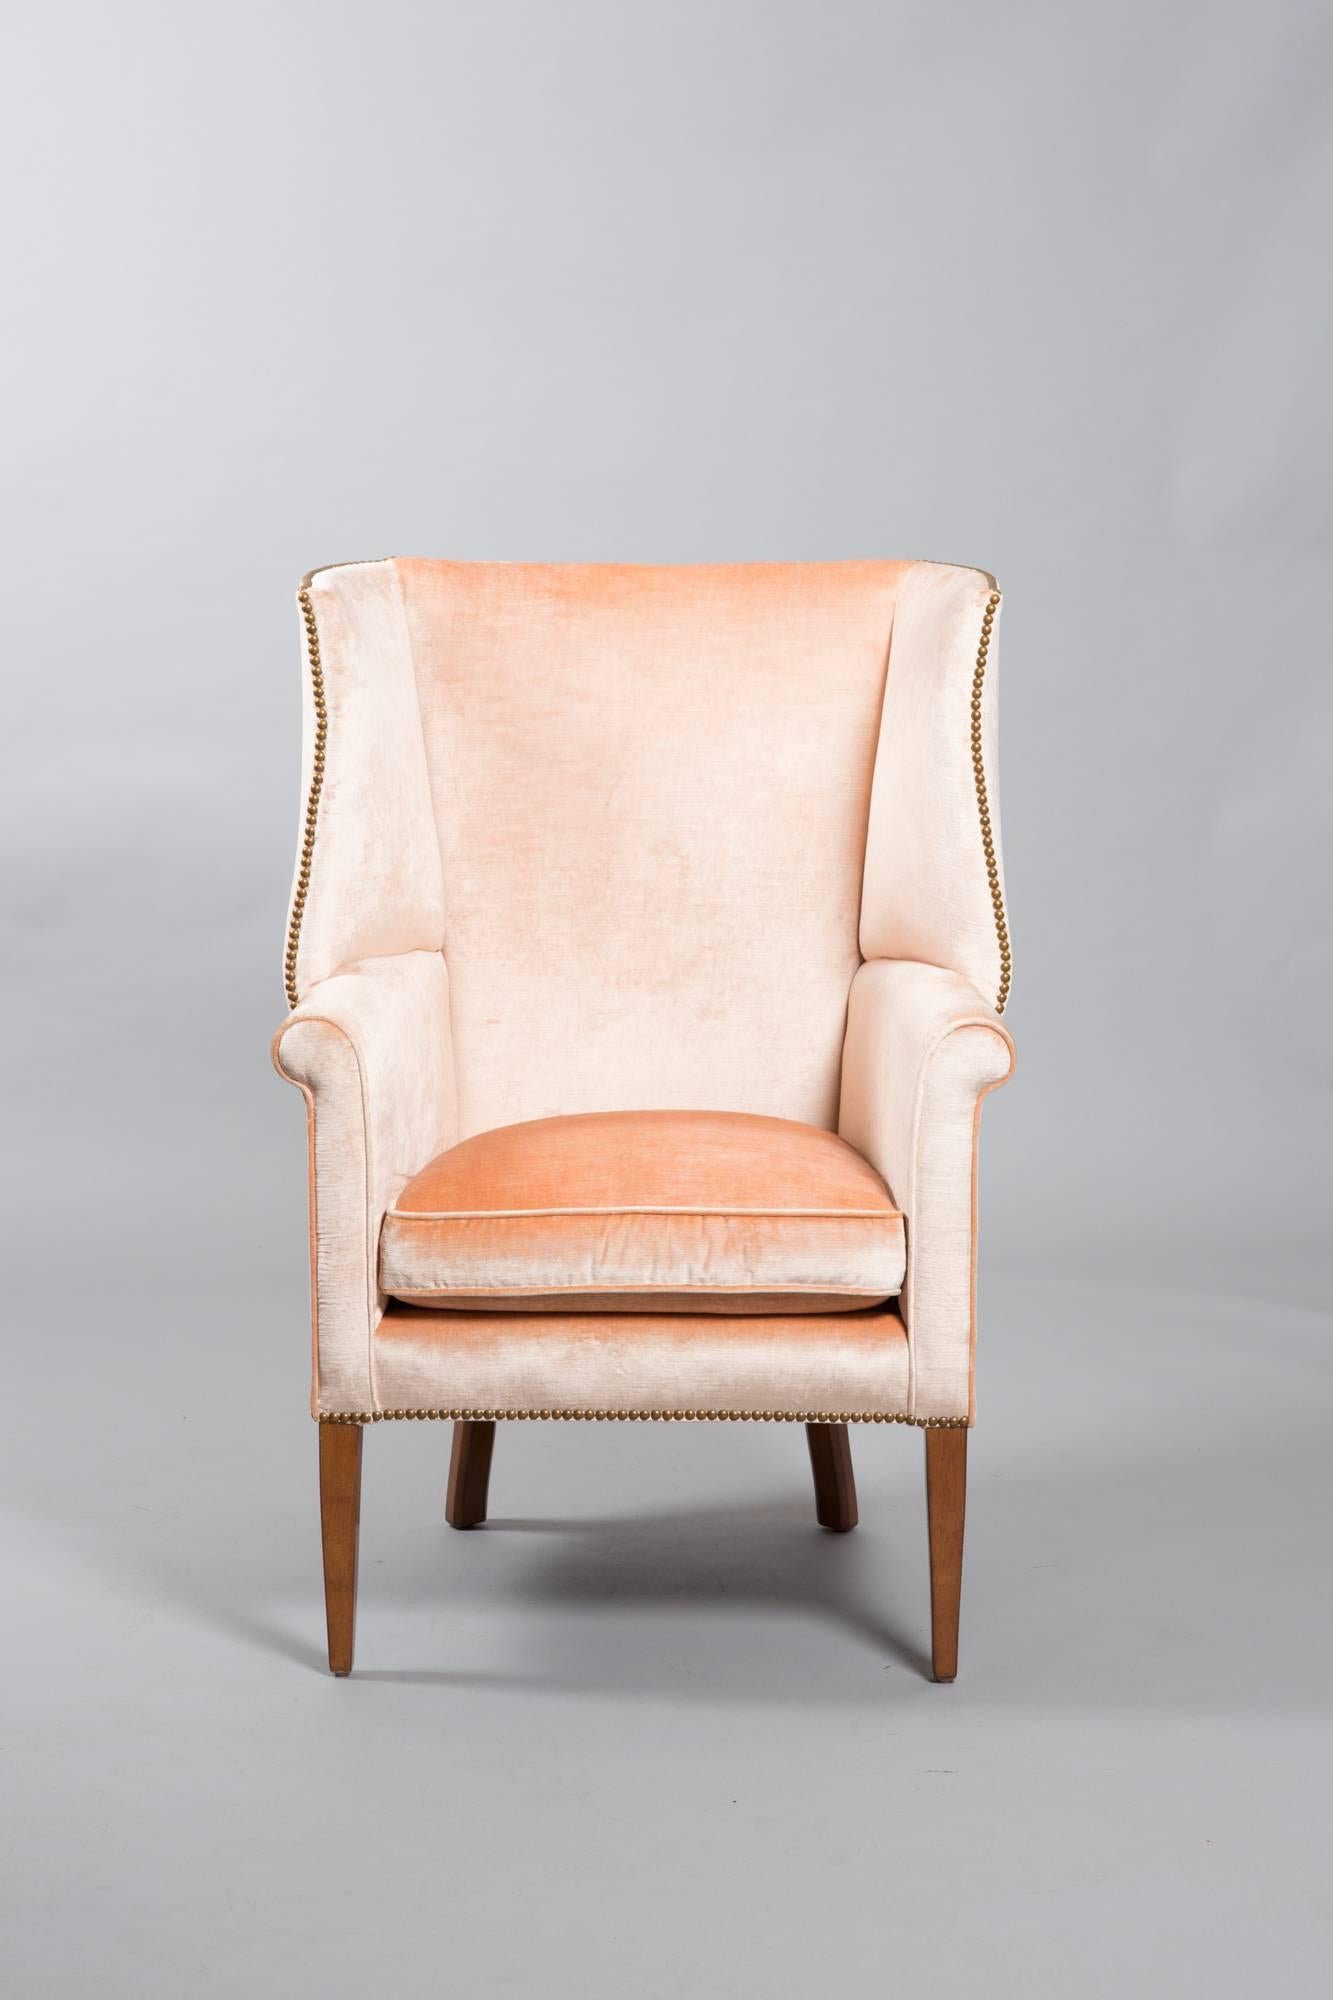 Chic 1950s American wingback armchair with apricot velvet. Great original condition.
Measure: 21.25